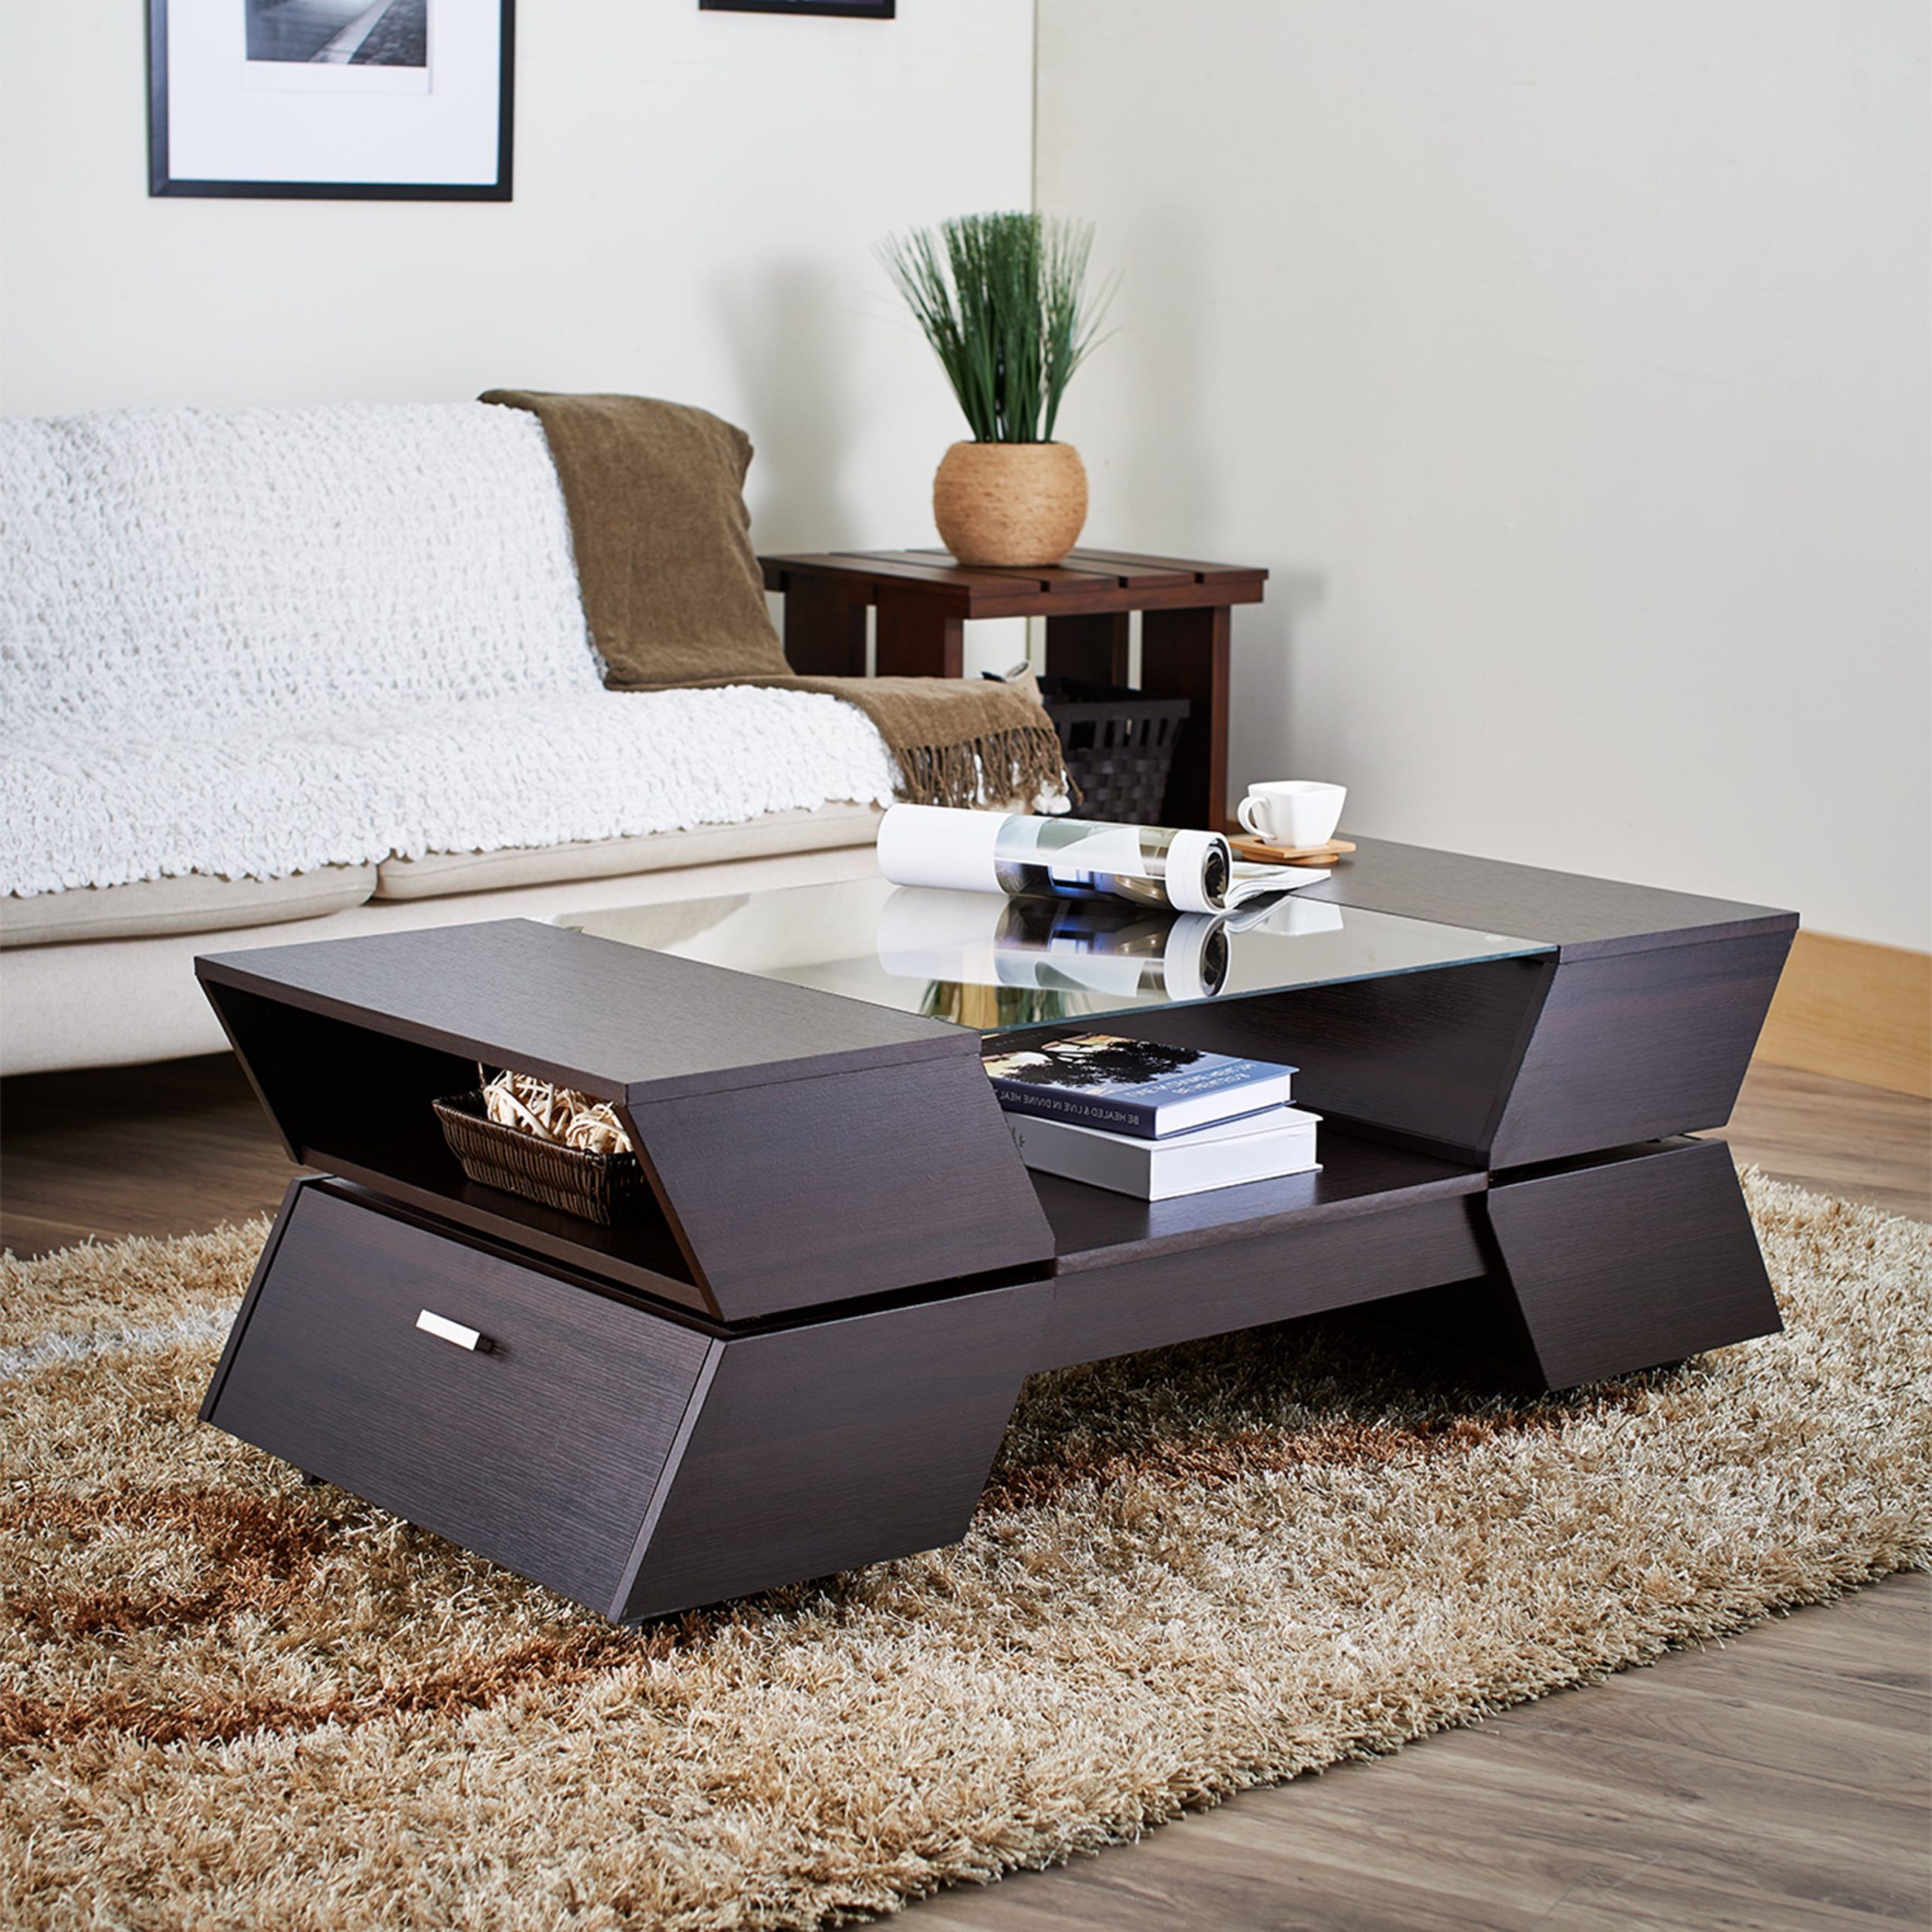 Widely Used Espresso Coffee Table With Glass Top : Elke Rectangular Glass Coffee Throughout Glass Top Coffee Tables (Photo 11 of 15)